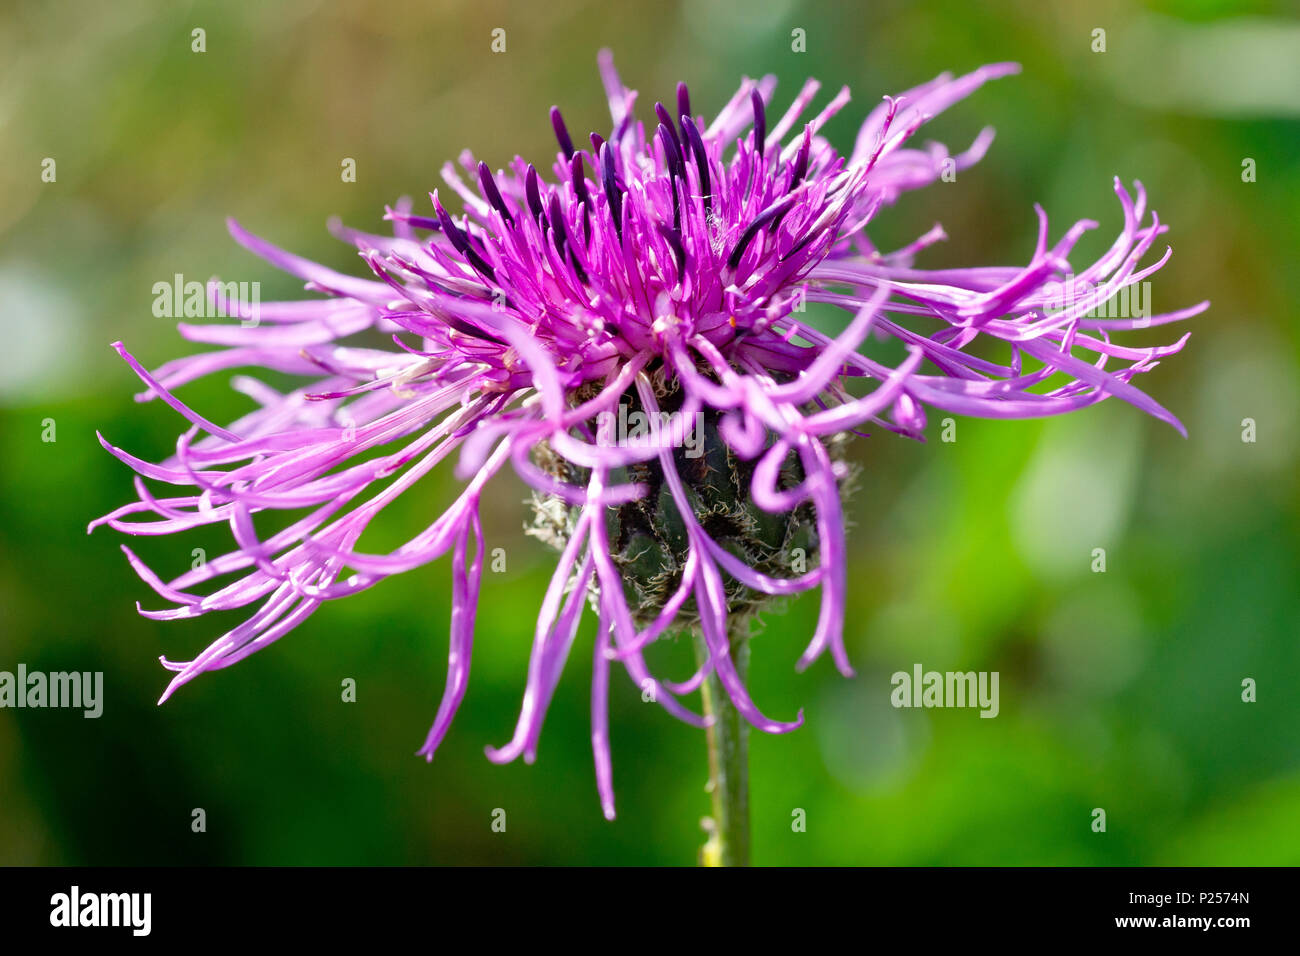 Greater Knapweed (centaurea scabiosa), close up of a single flower showing detail. Stock Photo